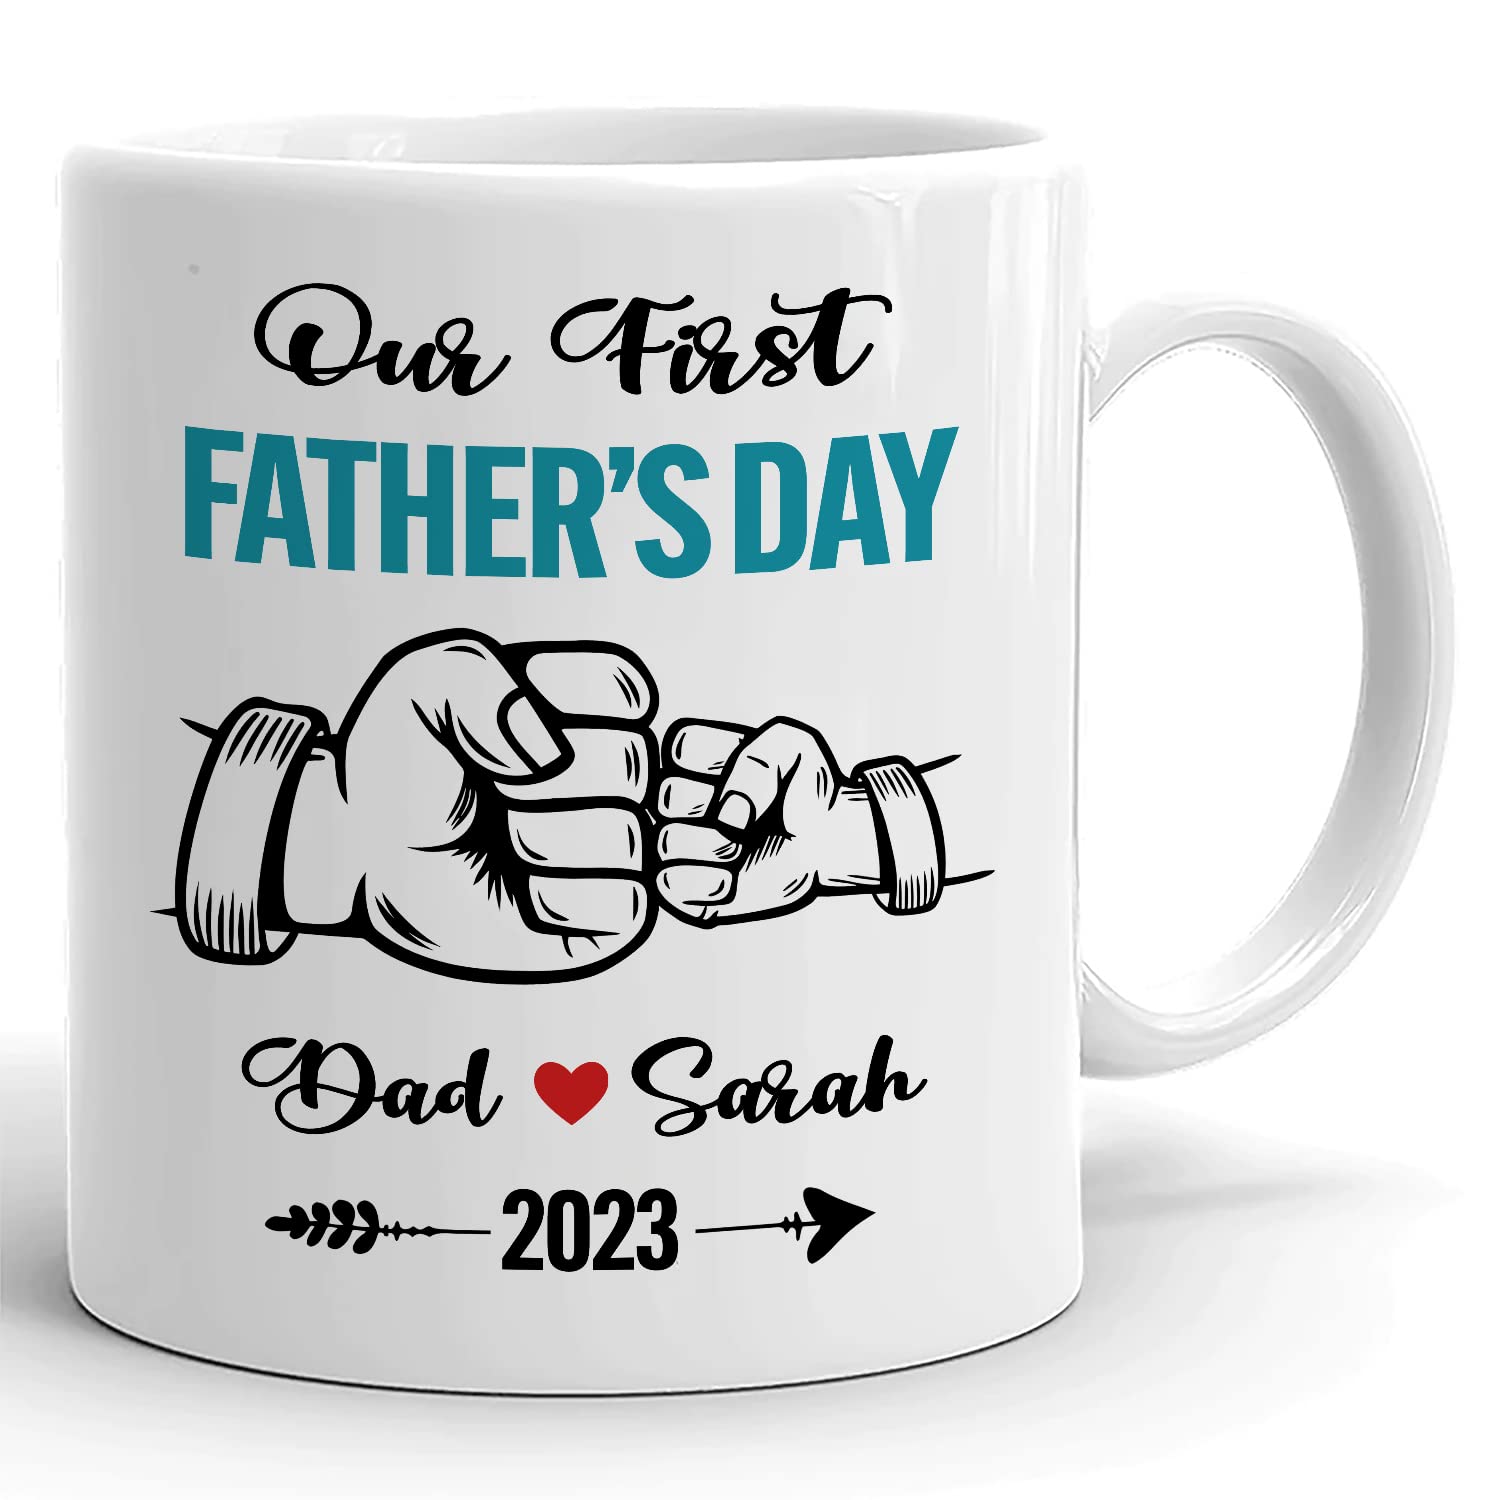 Personalized First Father’s Day Ceramic Coffee Mug, Gift For New Dad, Happy First Father’s Day, Gift For First Daddy, First Father’s Day Gifts, Our First Father’s Day Mug